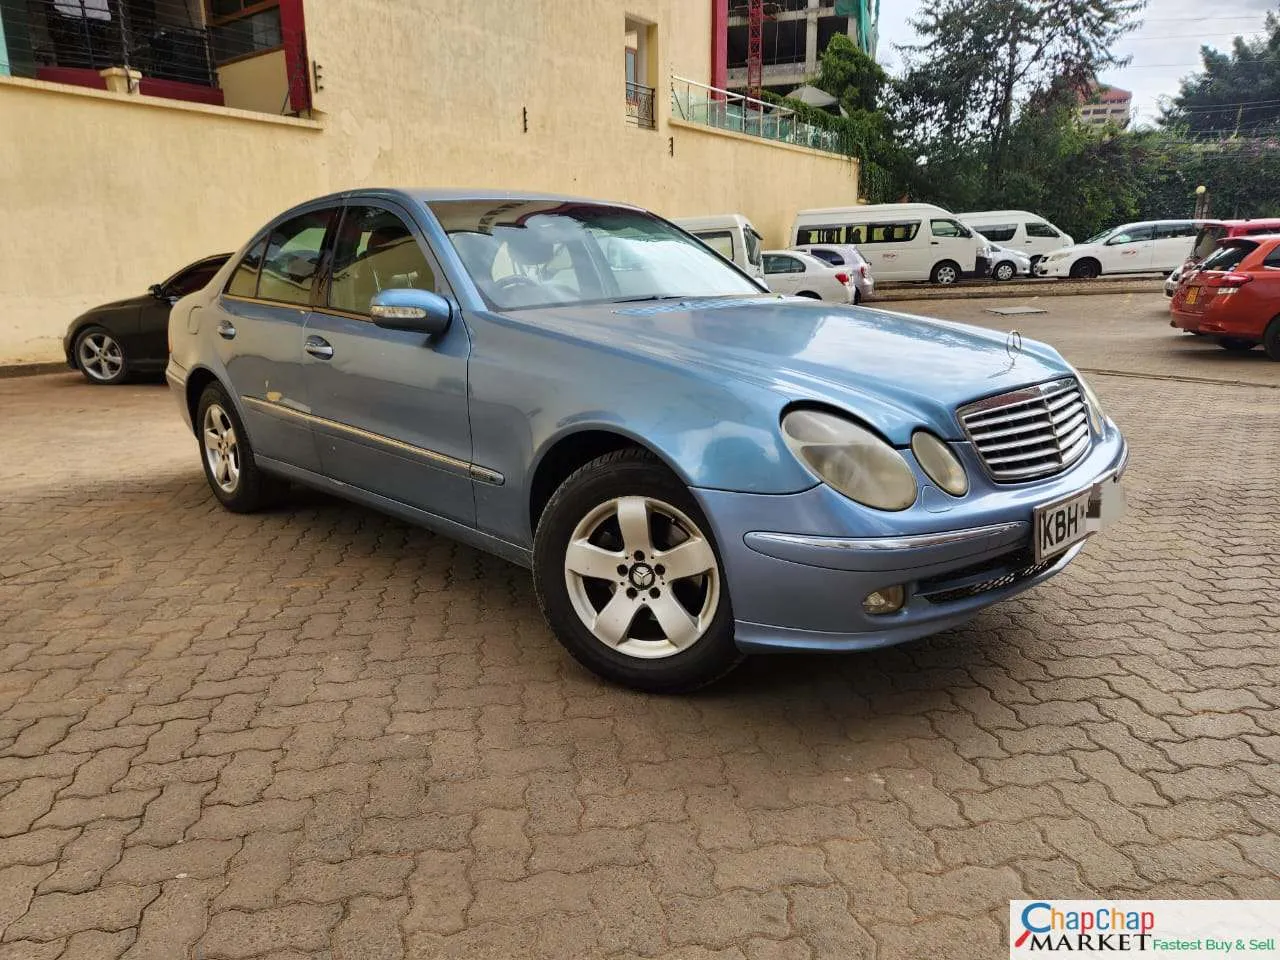 Mercedes Benz E200 🔥 QUICK SALE You Pay 30% DEPOSIT Trade in OK EXCLUSIVE